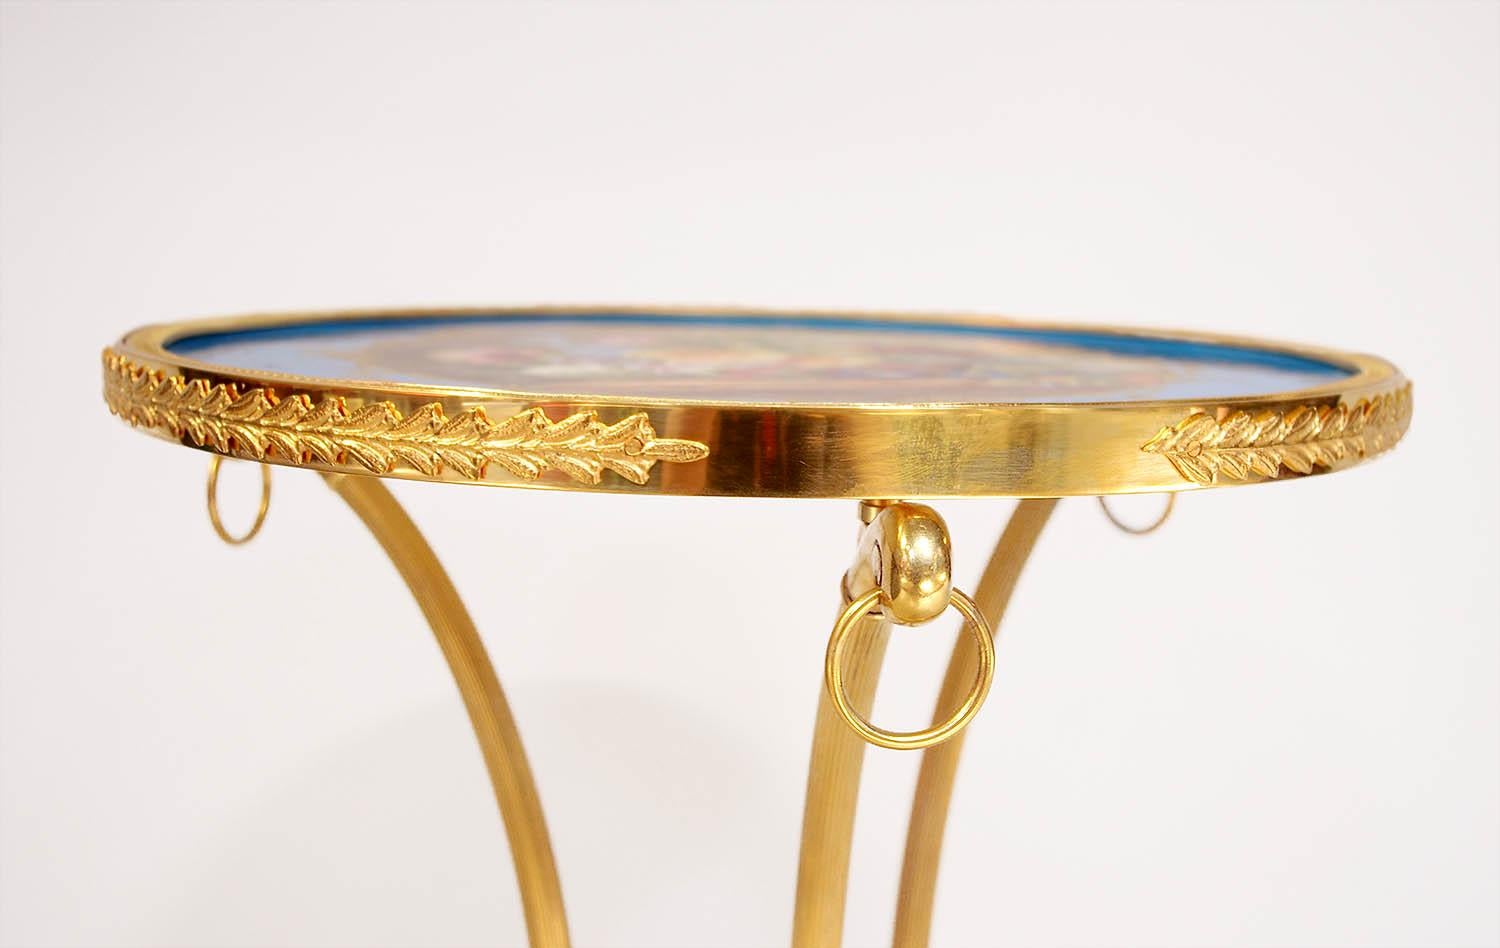 Directoire style athenienne stand table in chiseled and gilt bronze composed of a tripod fluted and tapered support on lion’s paw feet. They’re joined bottom by a concave stretcher forming a Stand on ball feet and in the middle by a circular one.